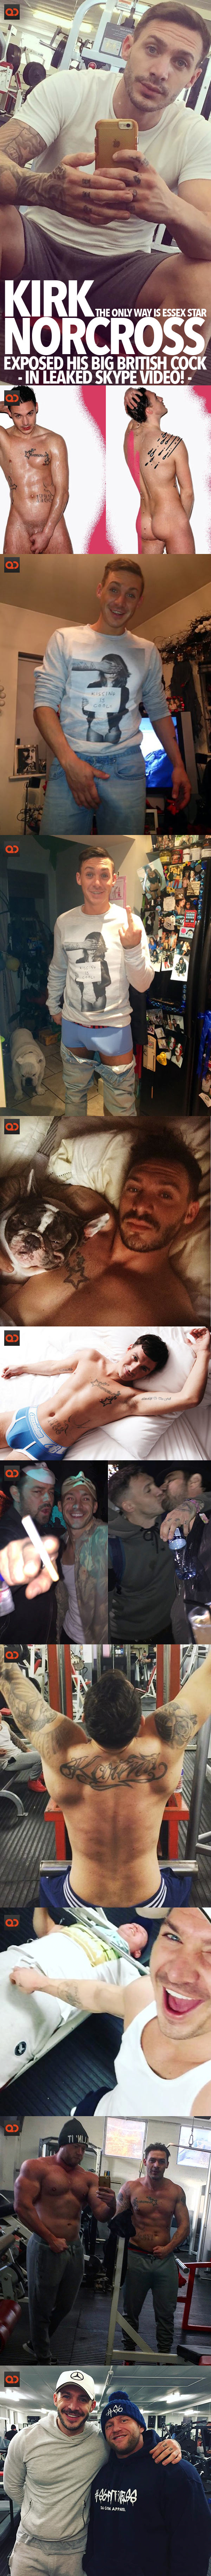 Kirk Norcross, From The Only Way Is Essex, Exposed His Big British Cock In Leaked Skype Video!